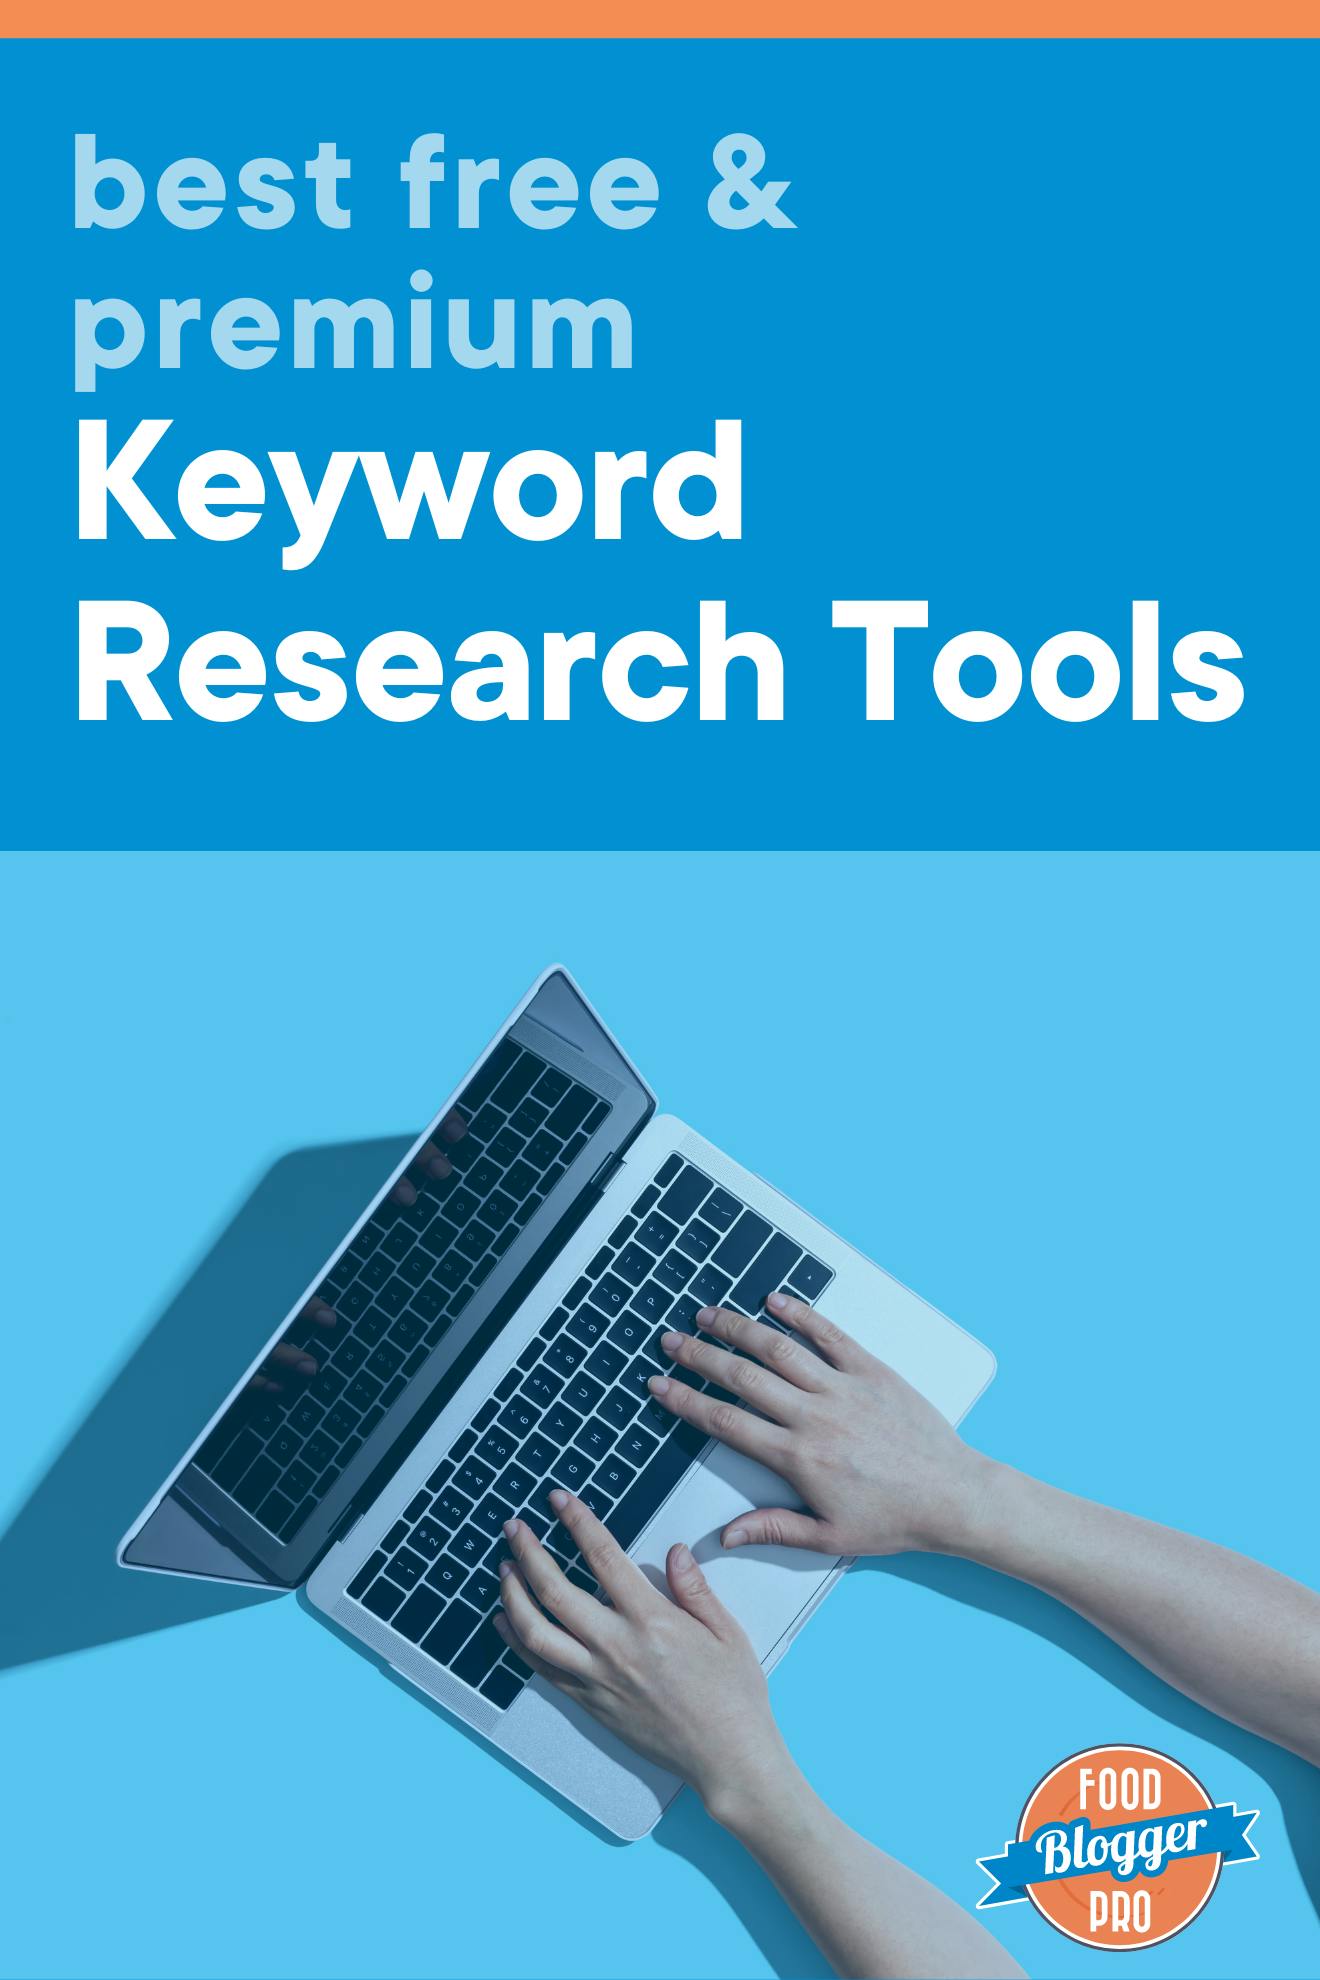 hands at a computer and the title of this blog article: 'best free & premium keyword research tools'